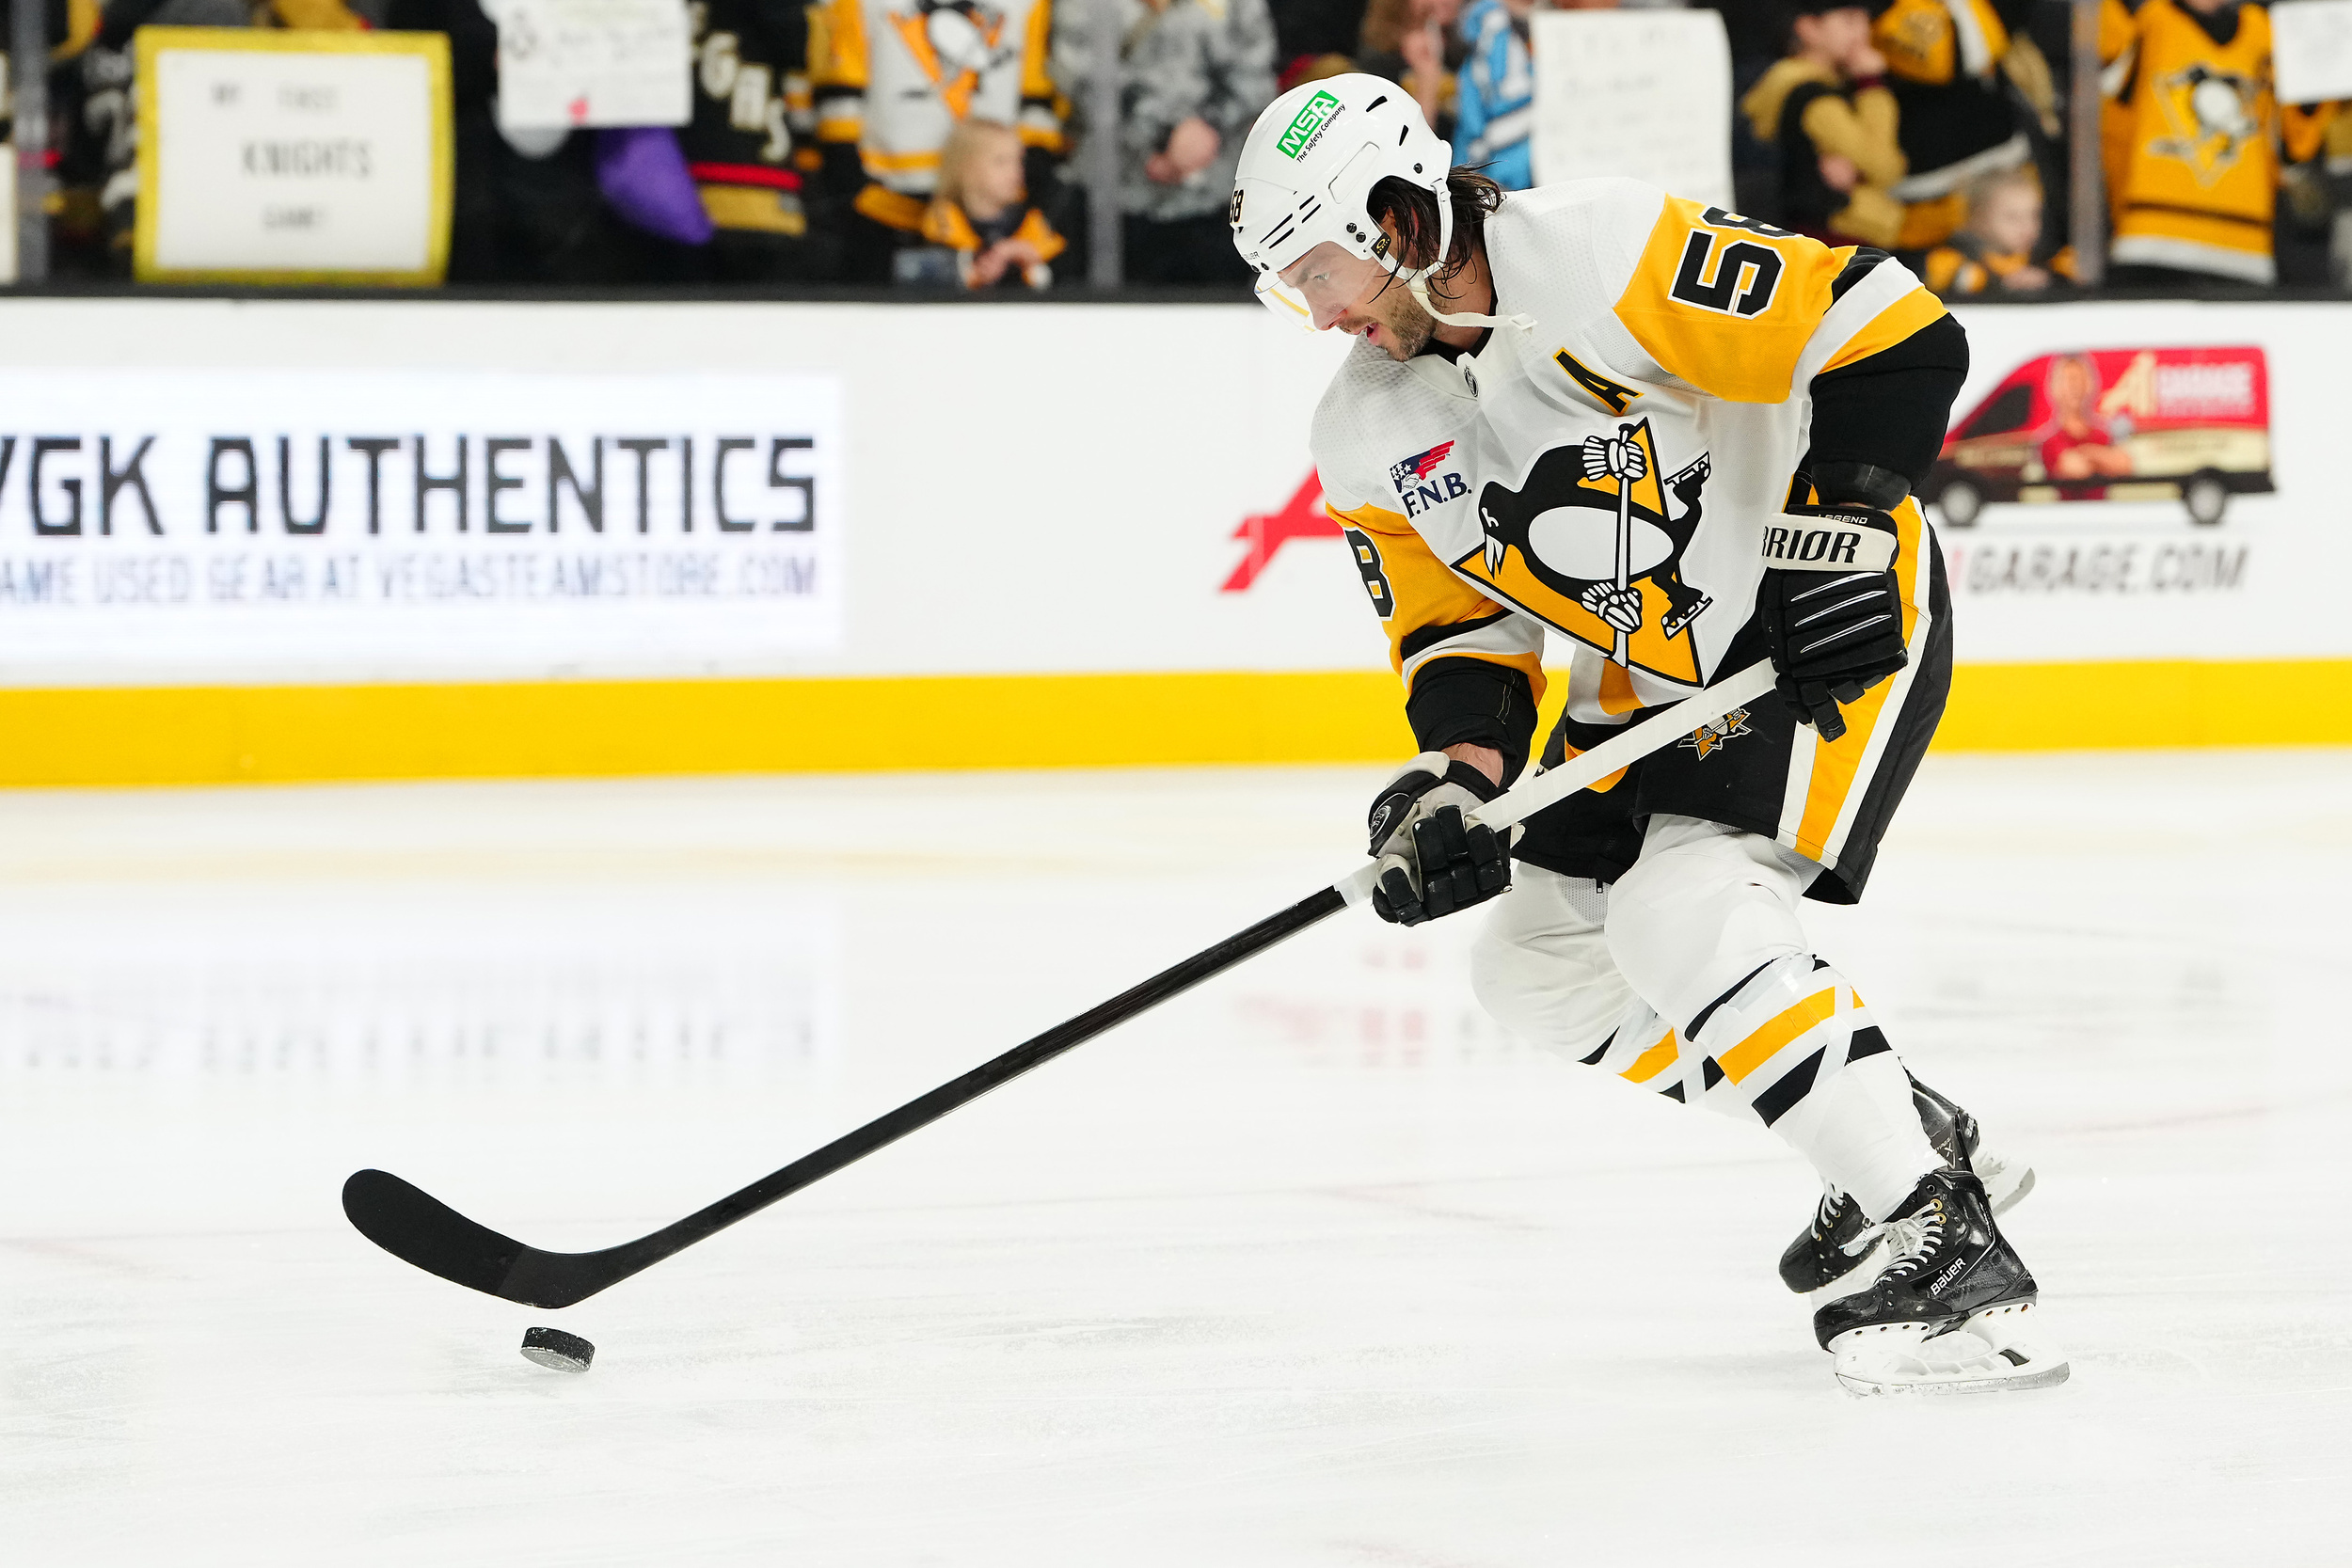 watch: pittsburgh penguins score historic own goal in embarrassing sequence